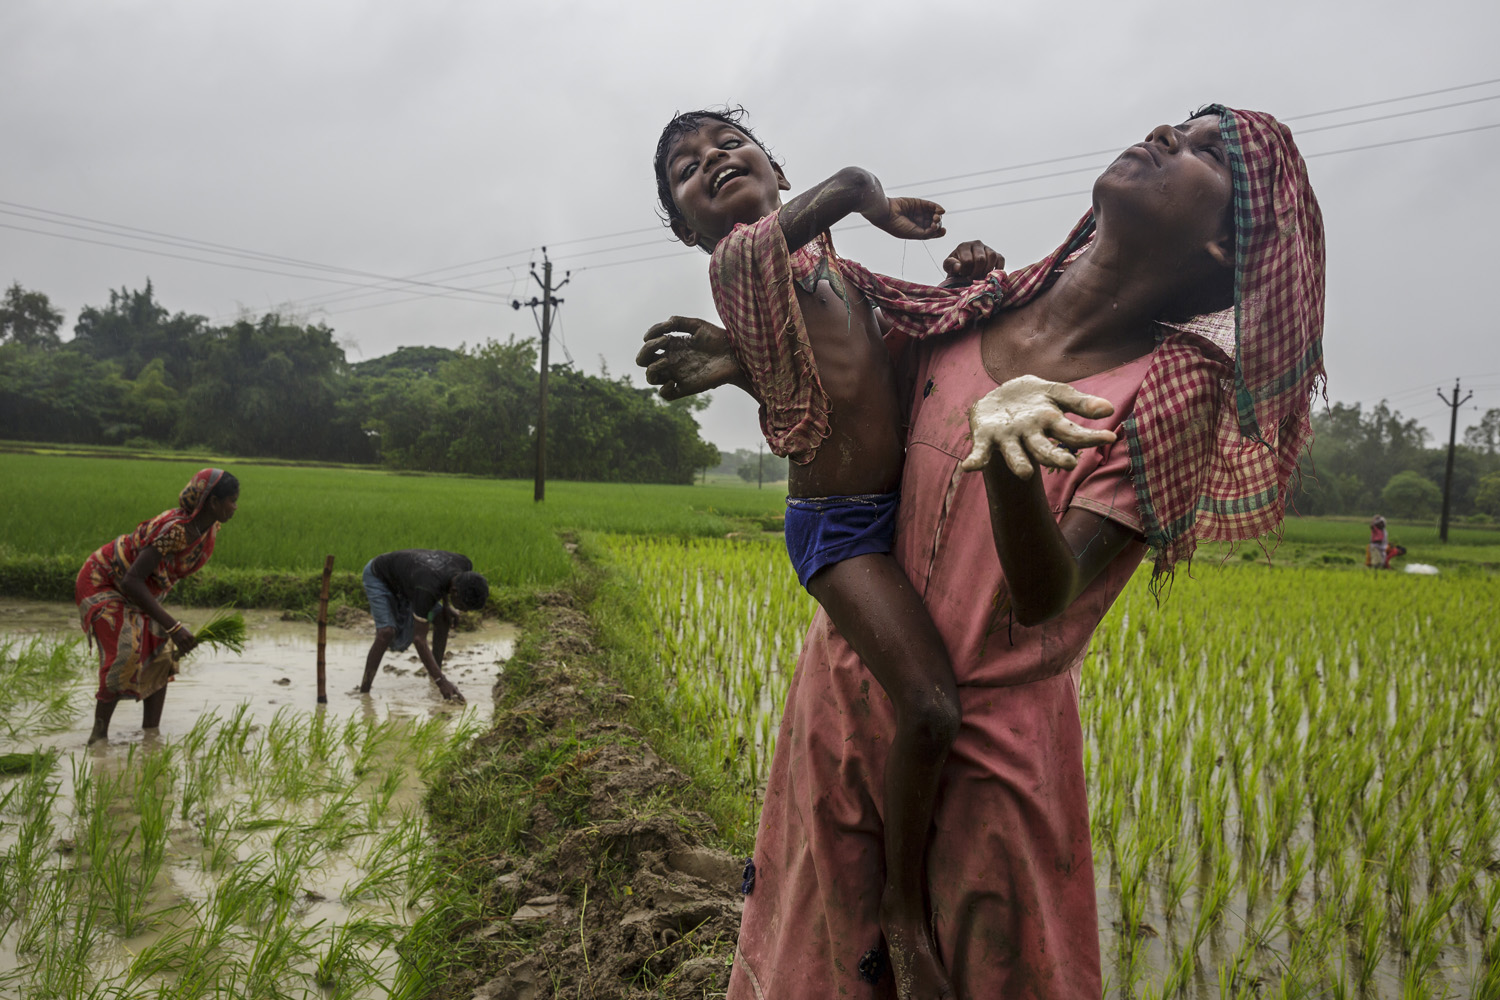 Sonia and Anita Singh accompany their parents during a rainstorm while they work in fields, Oct. 21, 2013 in West Bengal, India.